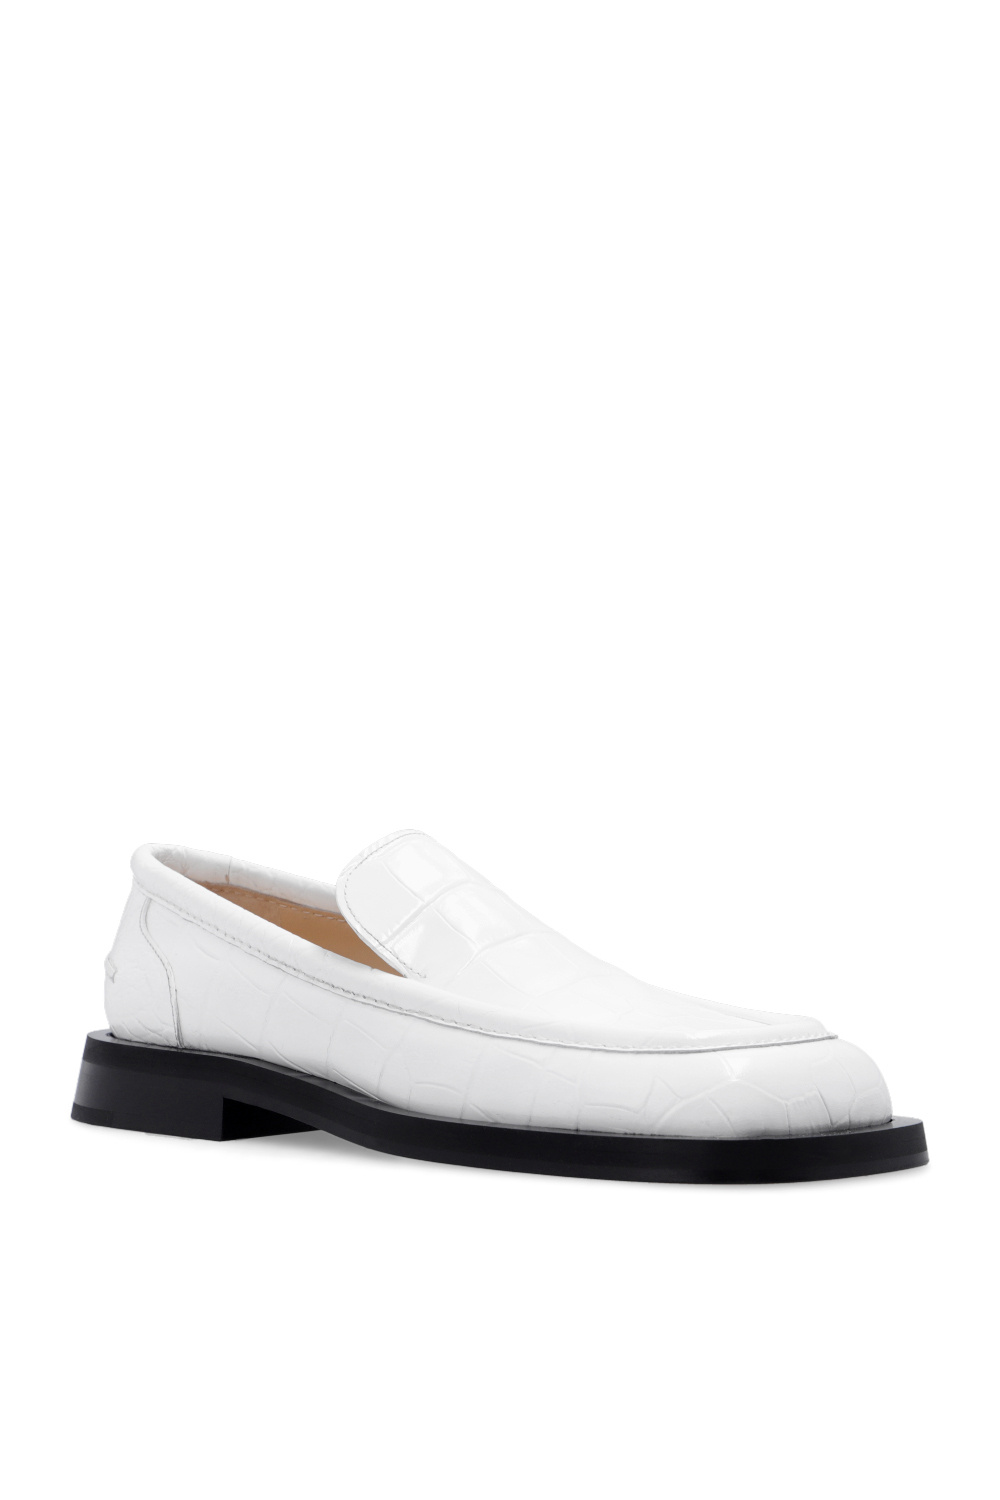 proenza Smith Schouler Leather moccasins